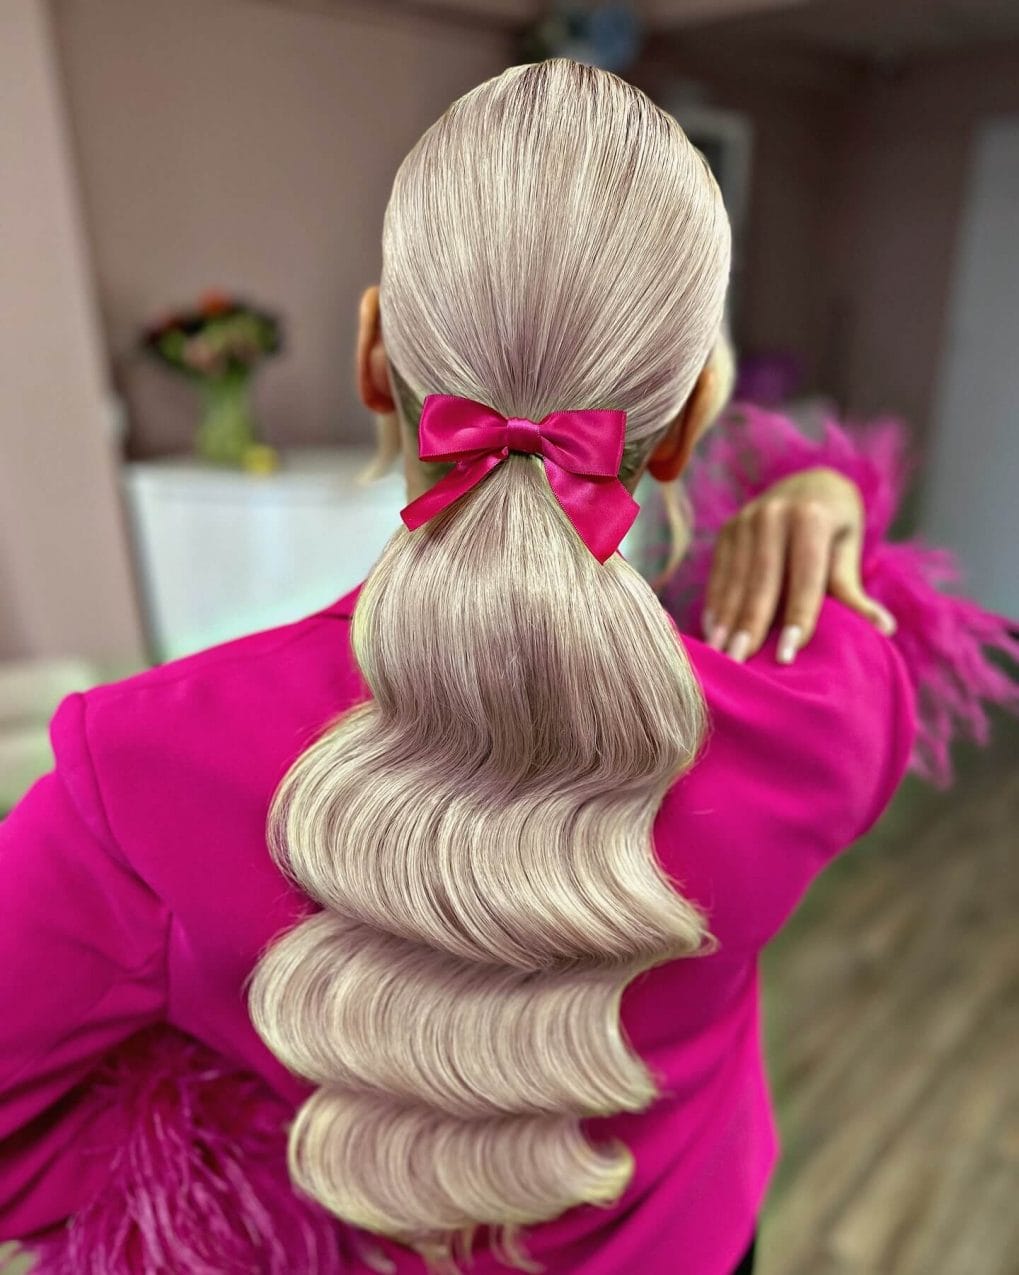 Sleek low ponytail with ice-blonde waves and pink bow